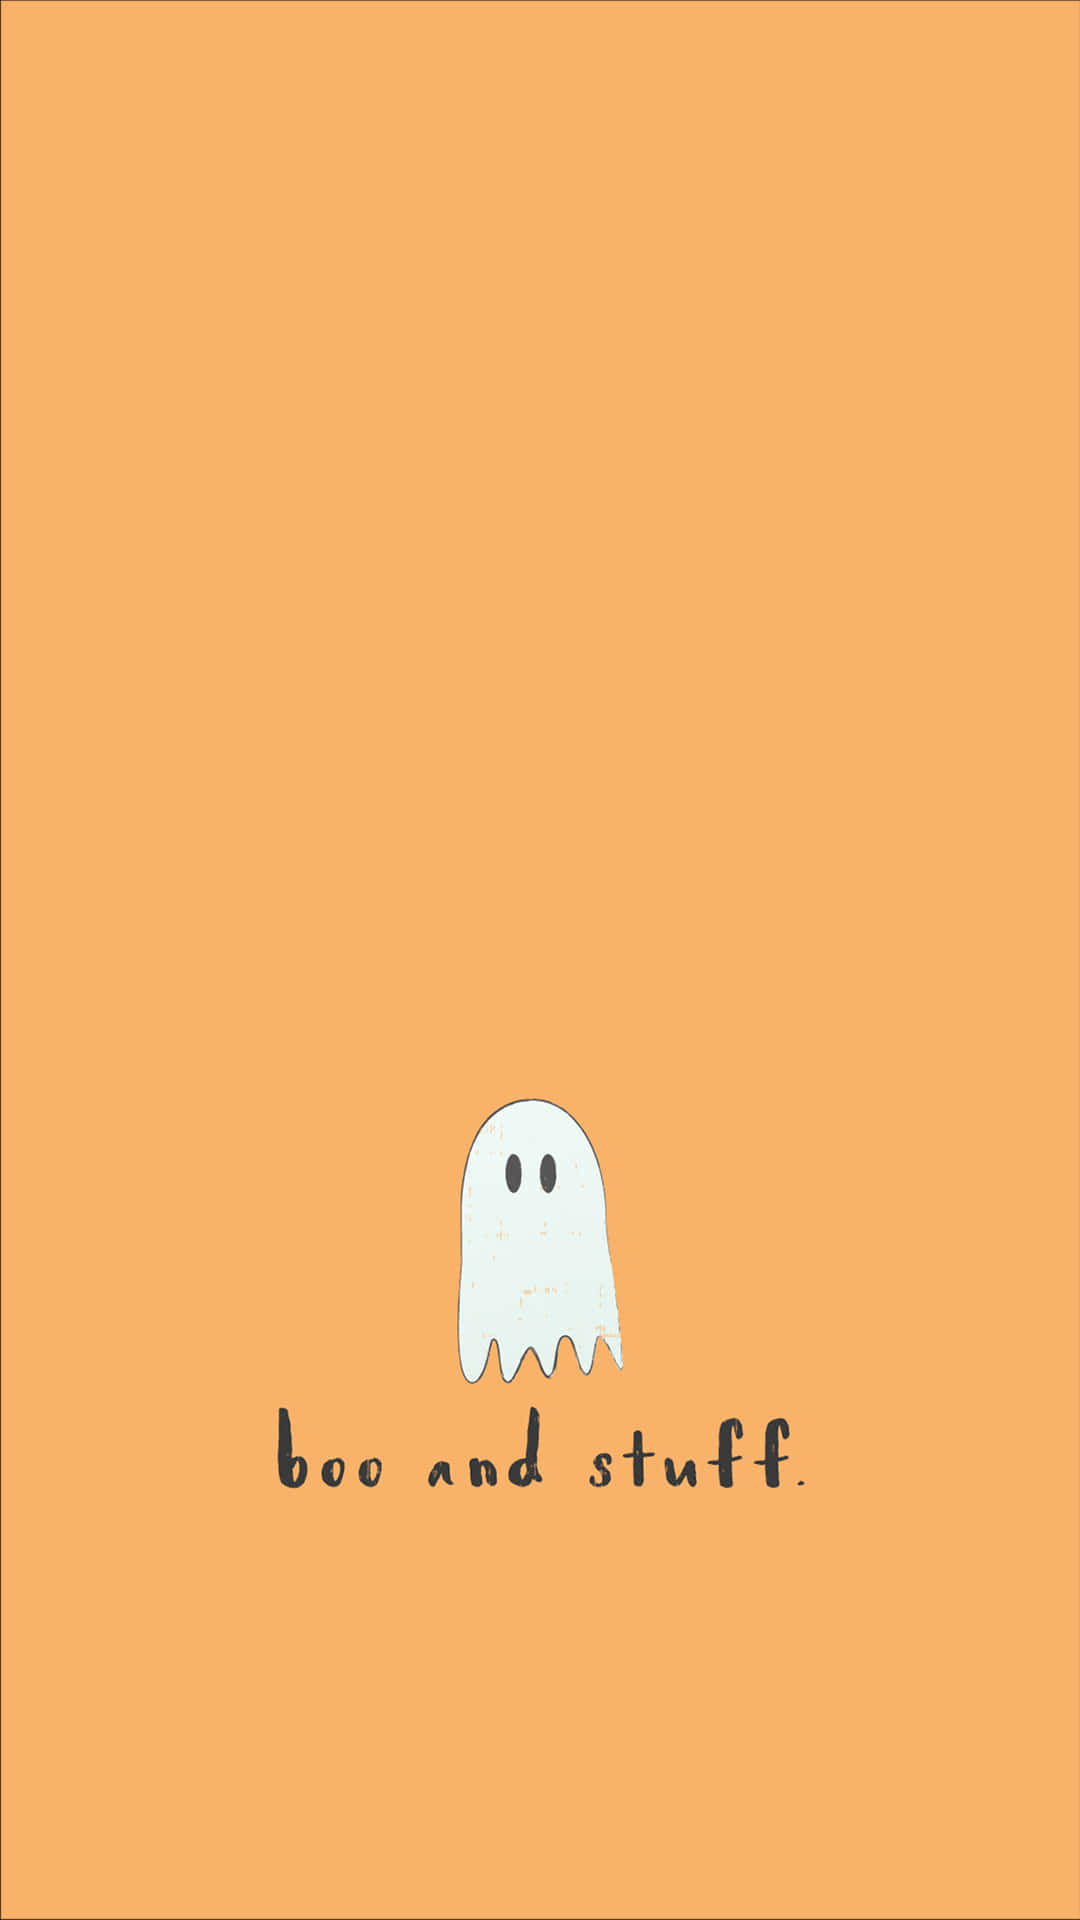 Look who's here! A cute ghost is ready to give you a spooky surprise this Halloween. Wallpaper